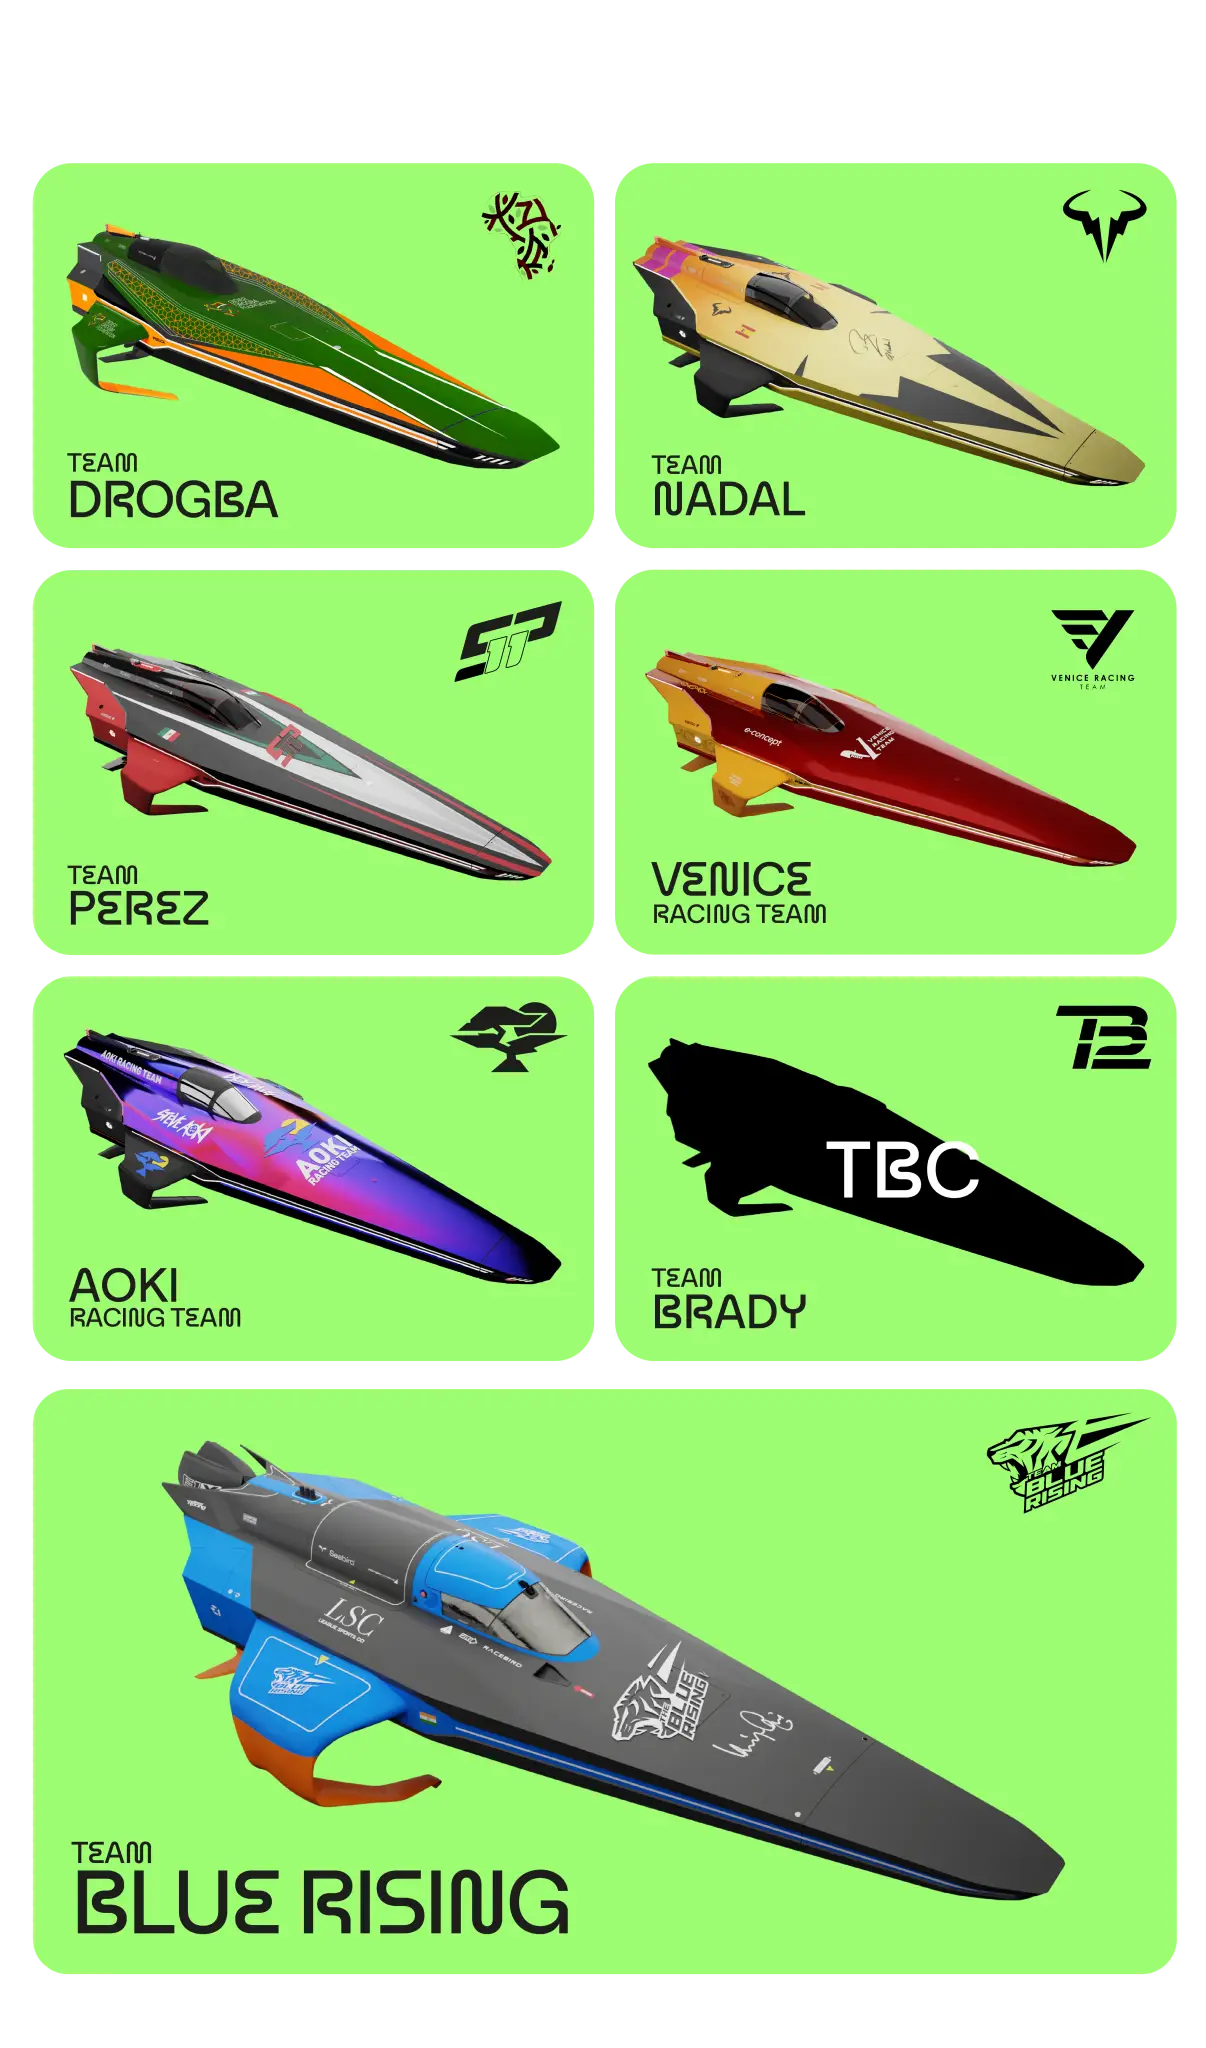 The boats of E1 Series